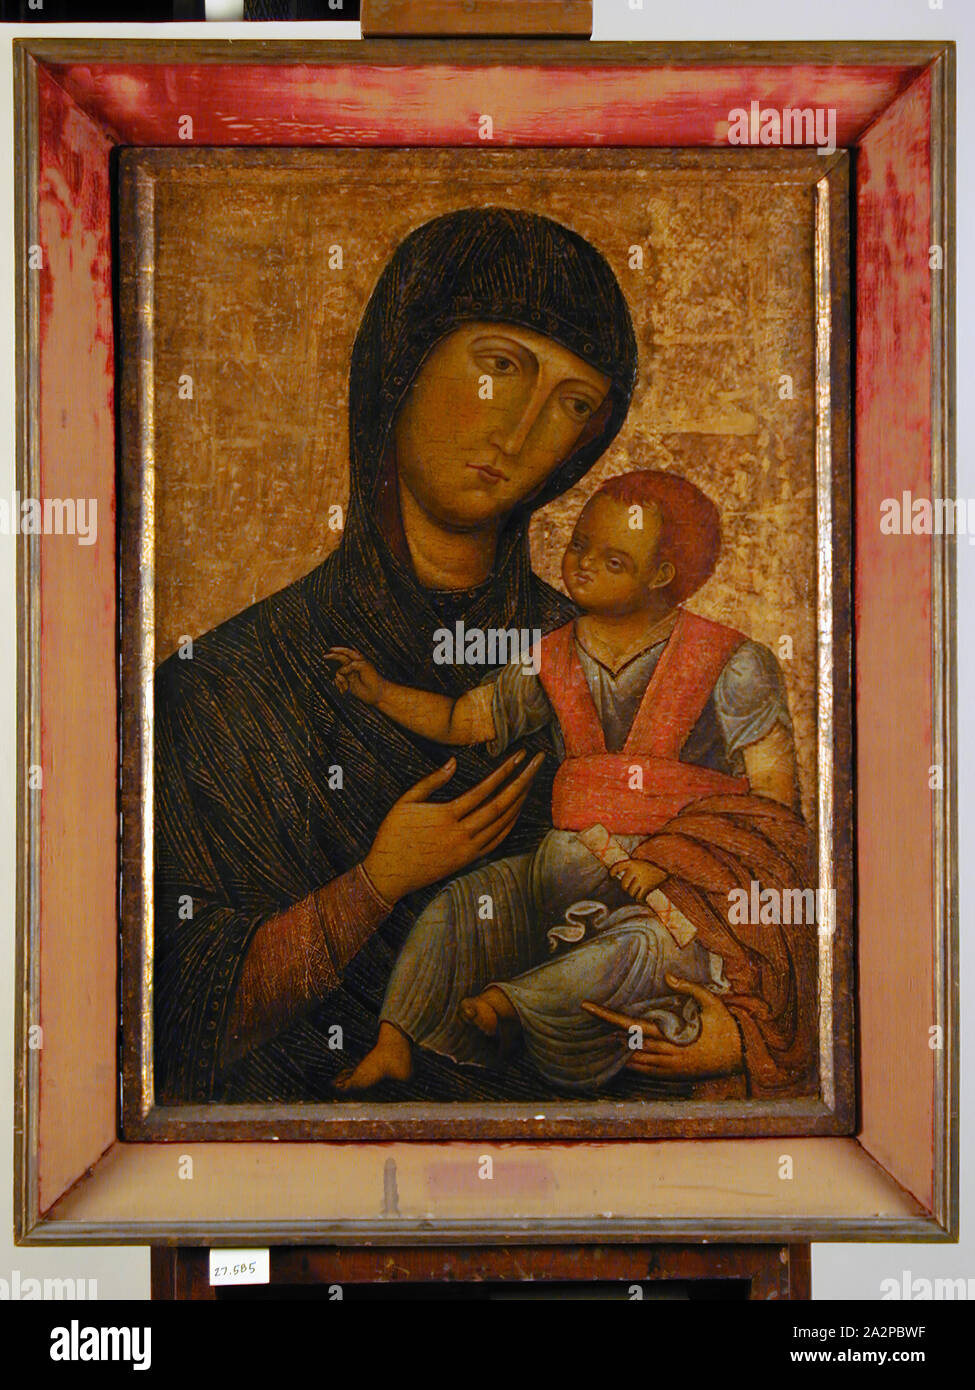 School of Venice, Italian, Madonna and Child, 13th Century, Paint on wood panel, Unframed: 35 × 26 inches (88.9 × 66 cm Stock Photo